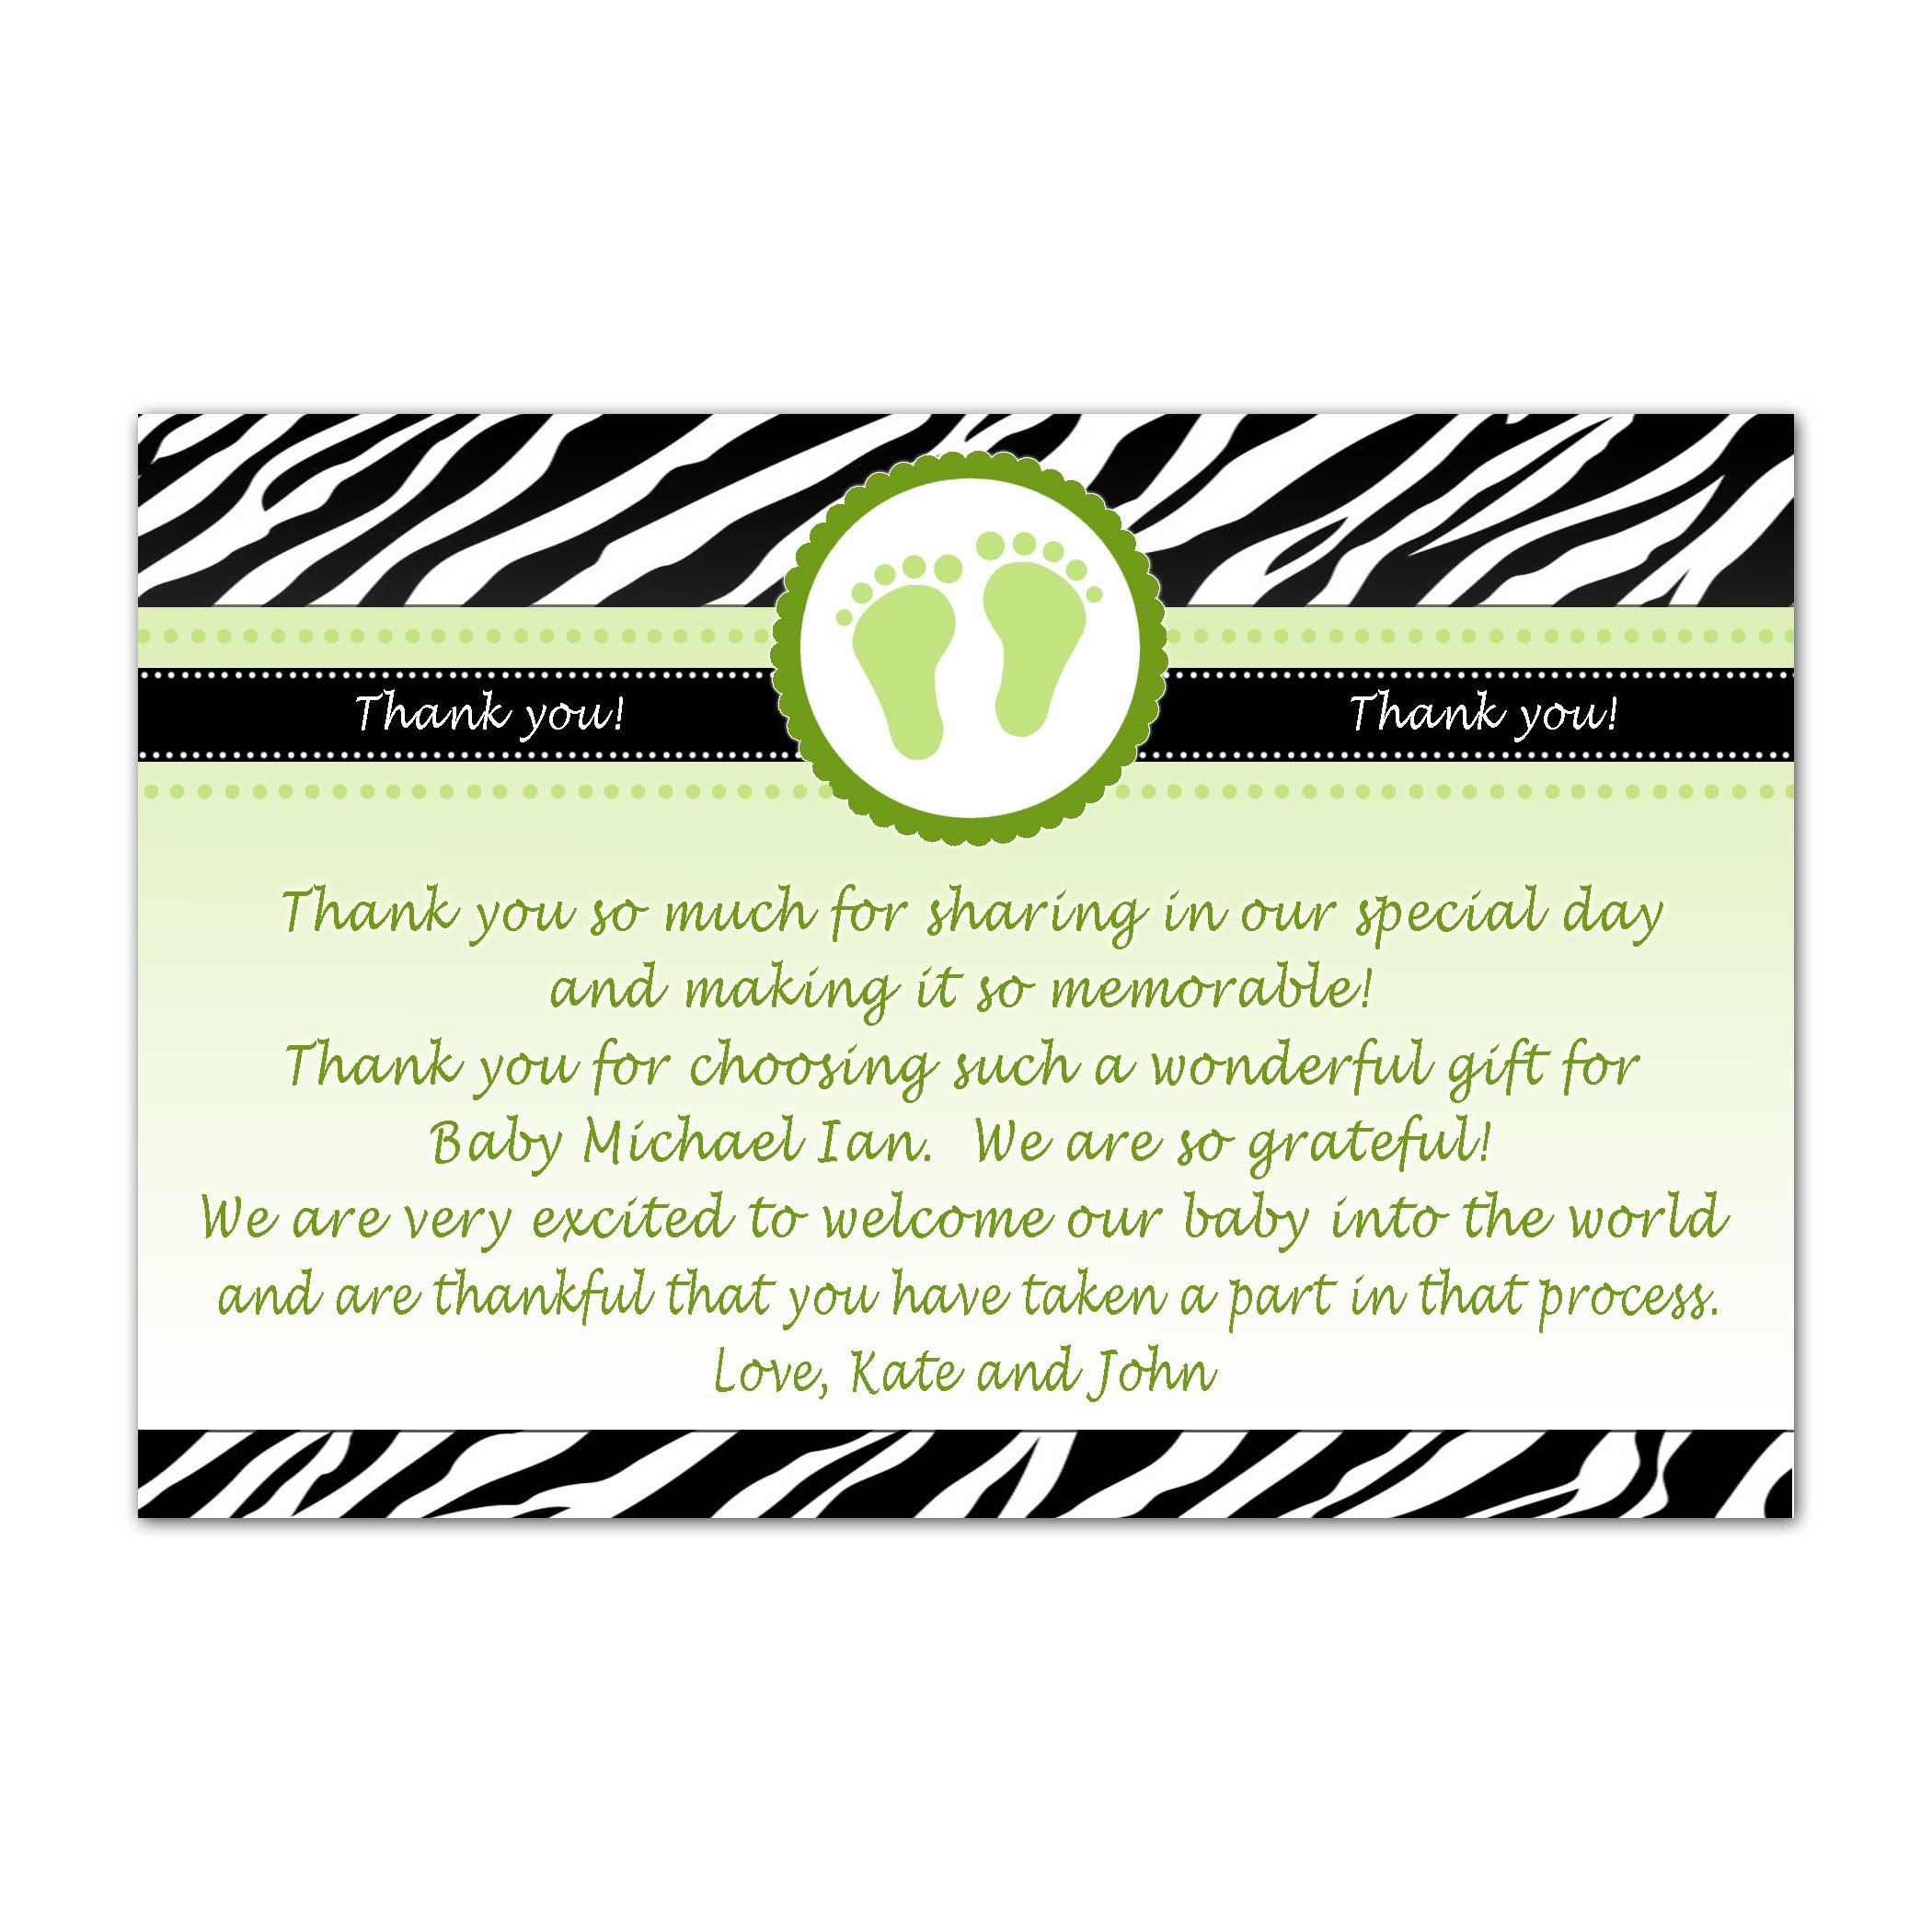 30 Personalized Thank You Cards Green Black Jungle Zebra Baby Feet Design Shower Party Photo Paper